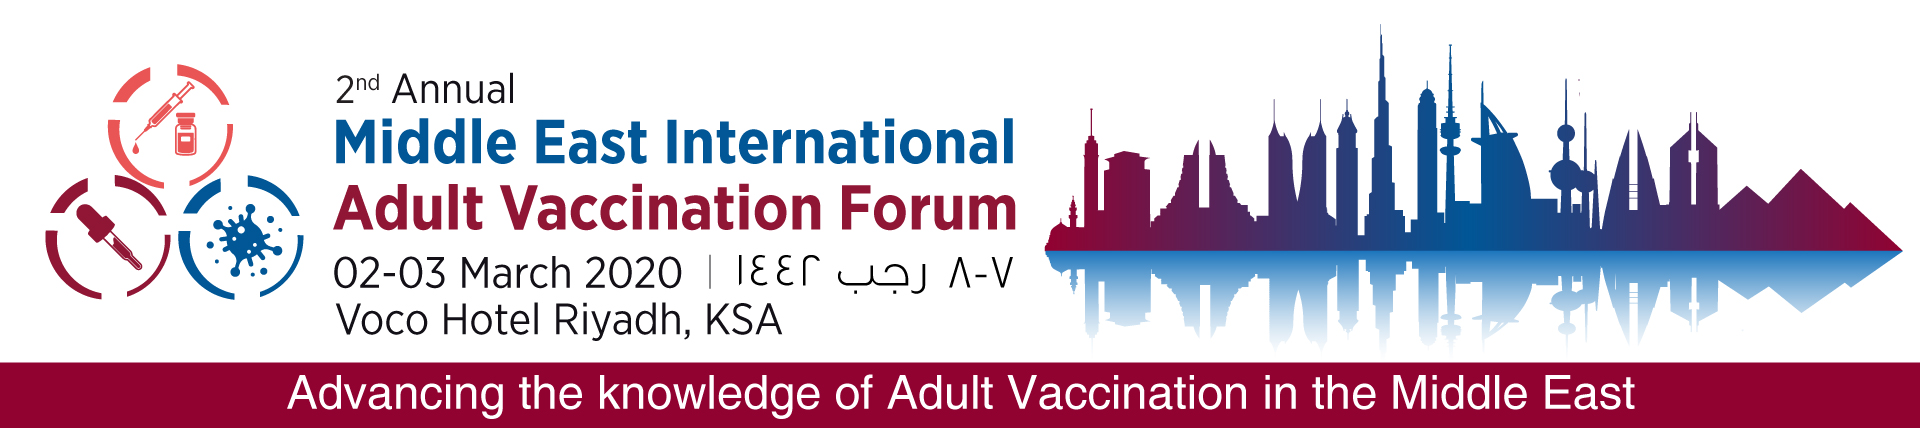 The 2nd Middle East International Adult Vaccination Forum